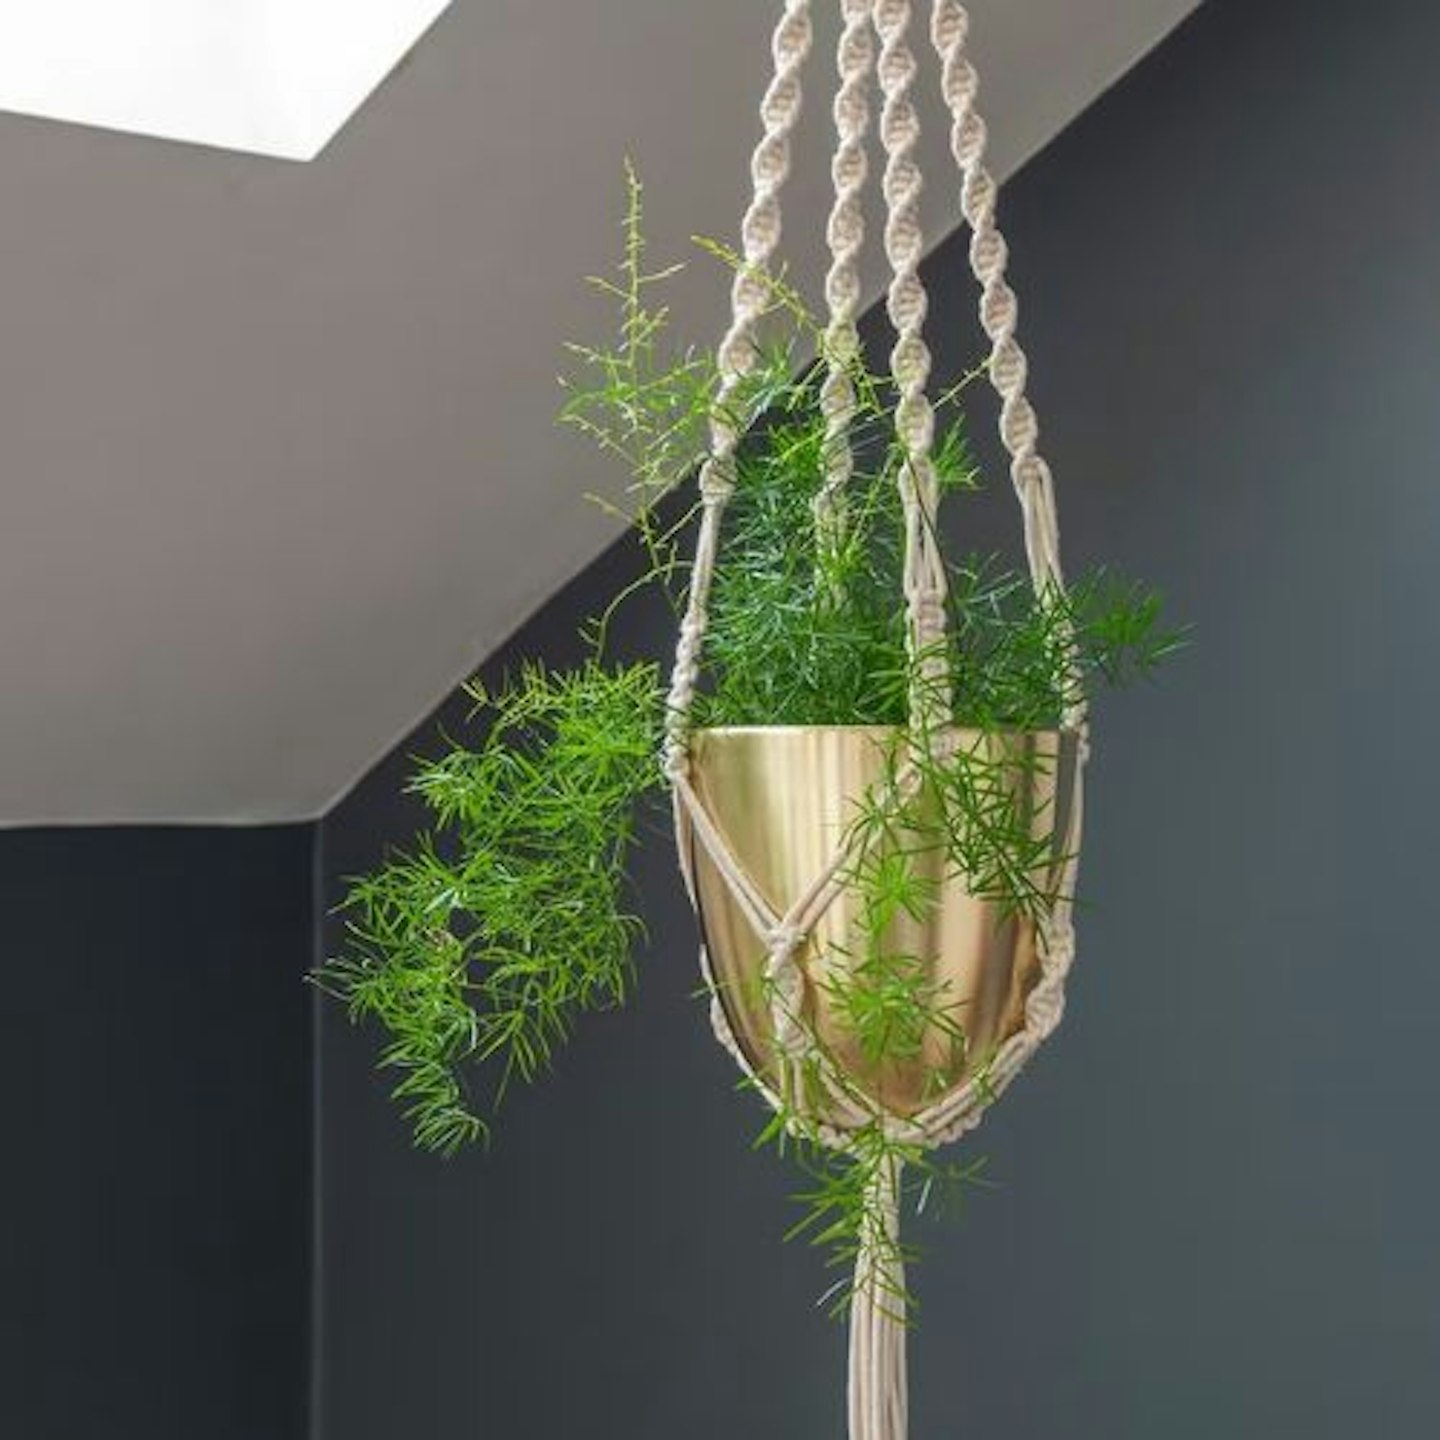 Macrame hanger with brushed brass pot